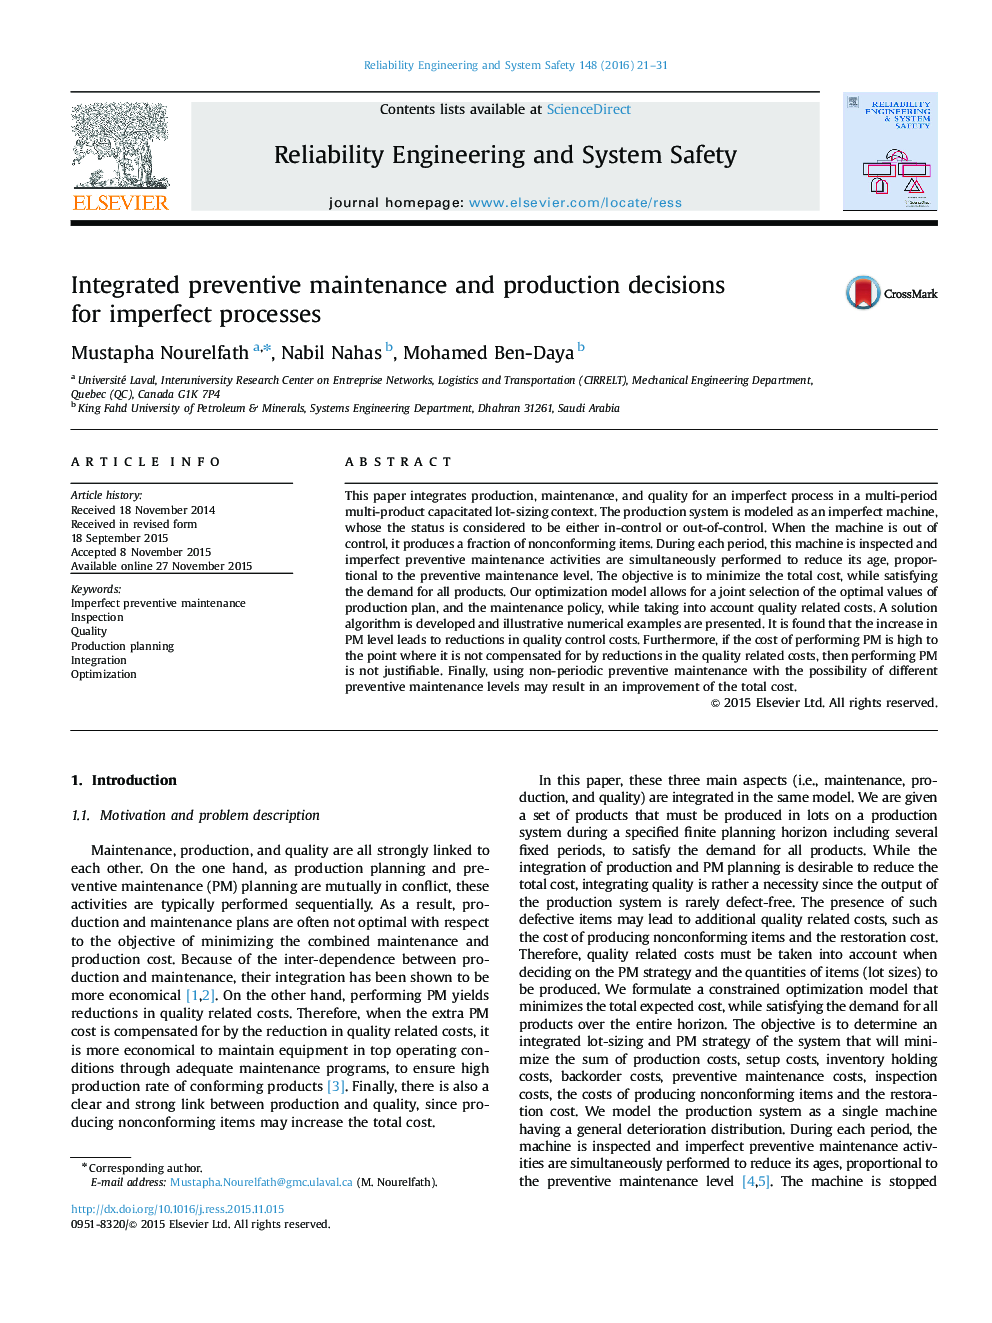 Integrated preventive maintenance and production decisions for imperfect processes